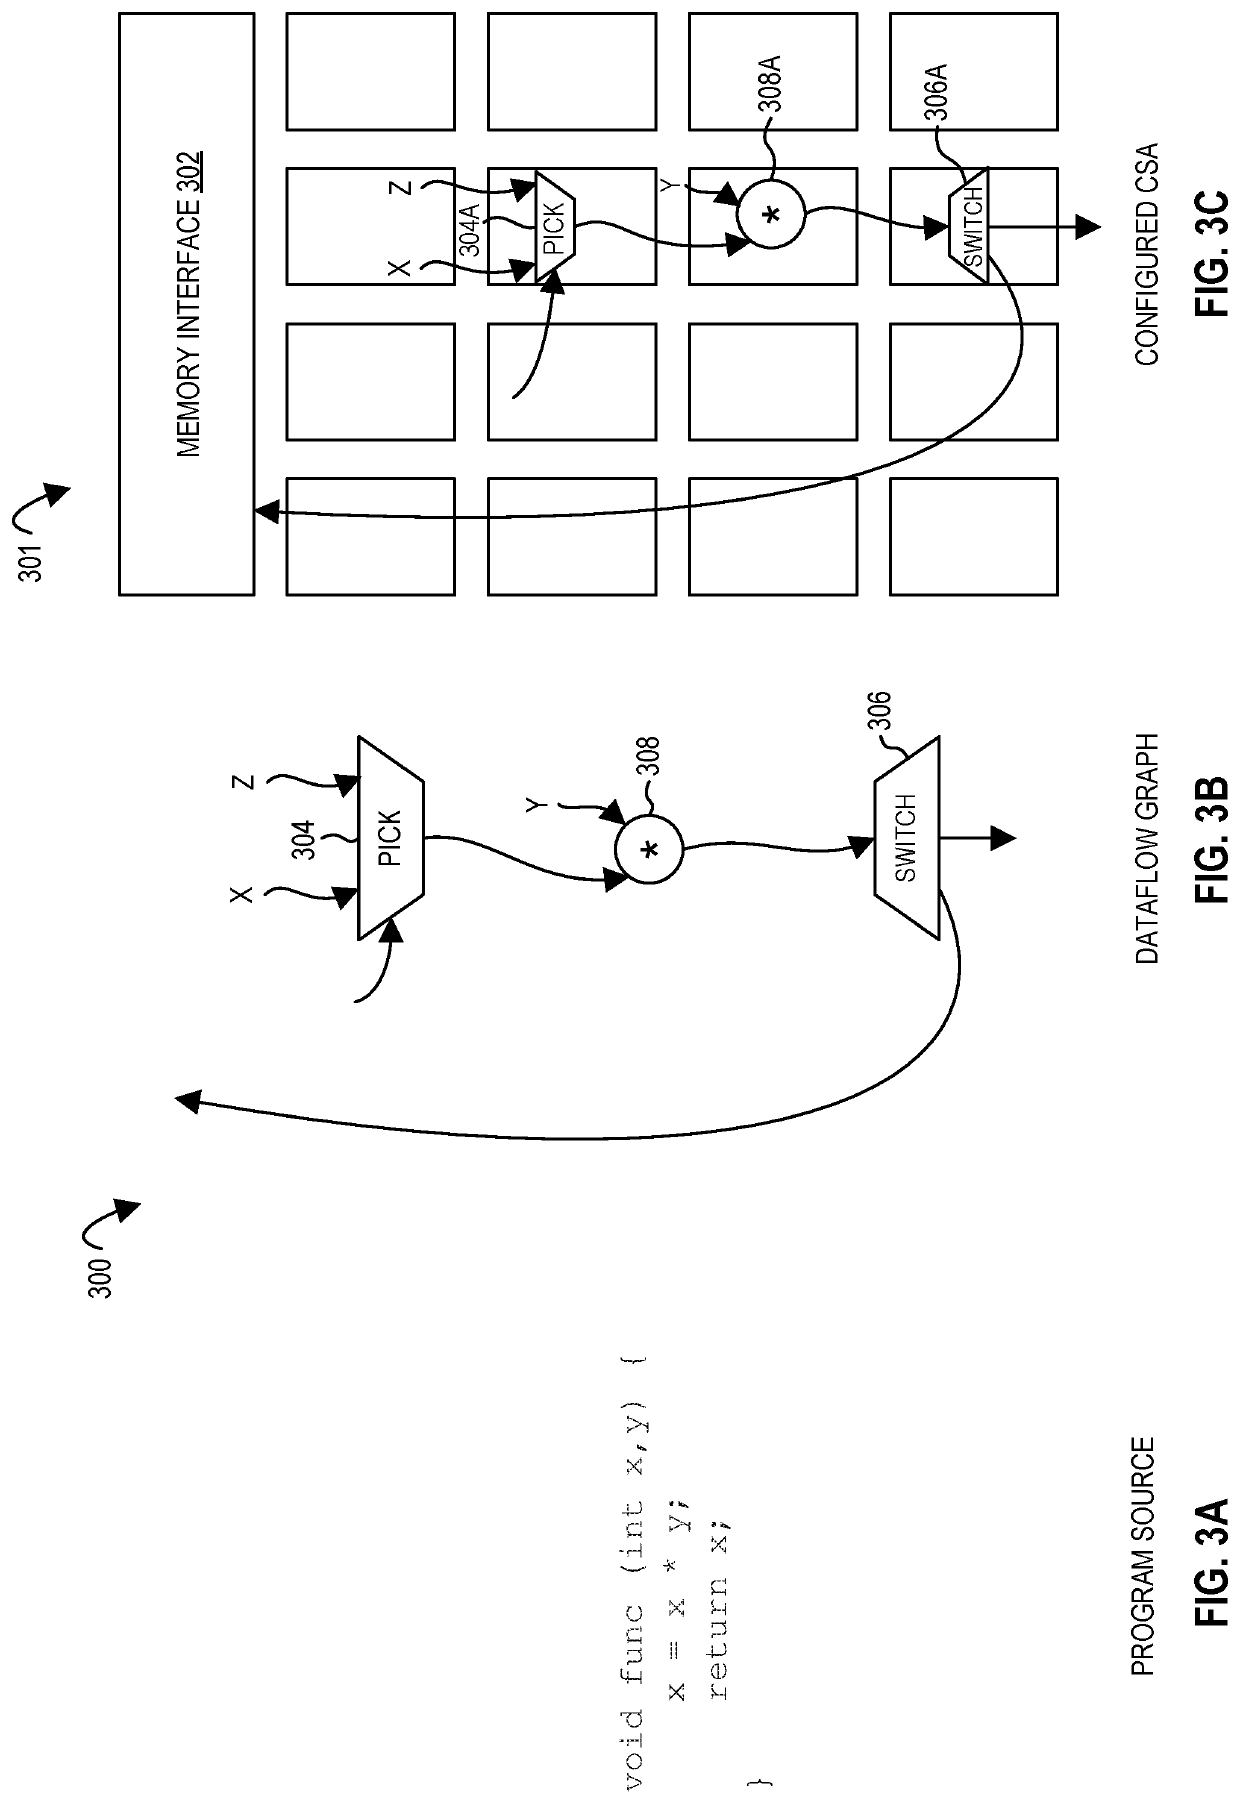 Apparatuses, methods, and systems for time-multiplexing in a configurable spatial accelerator